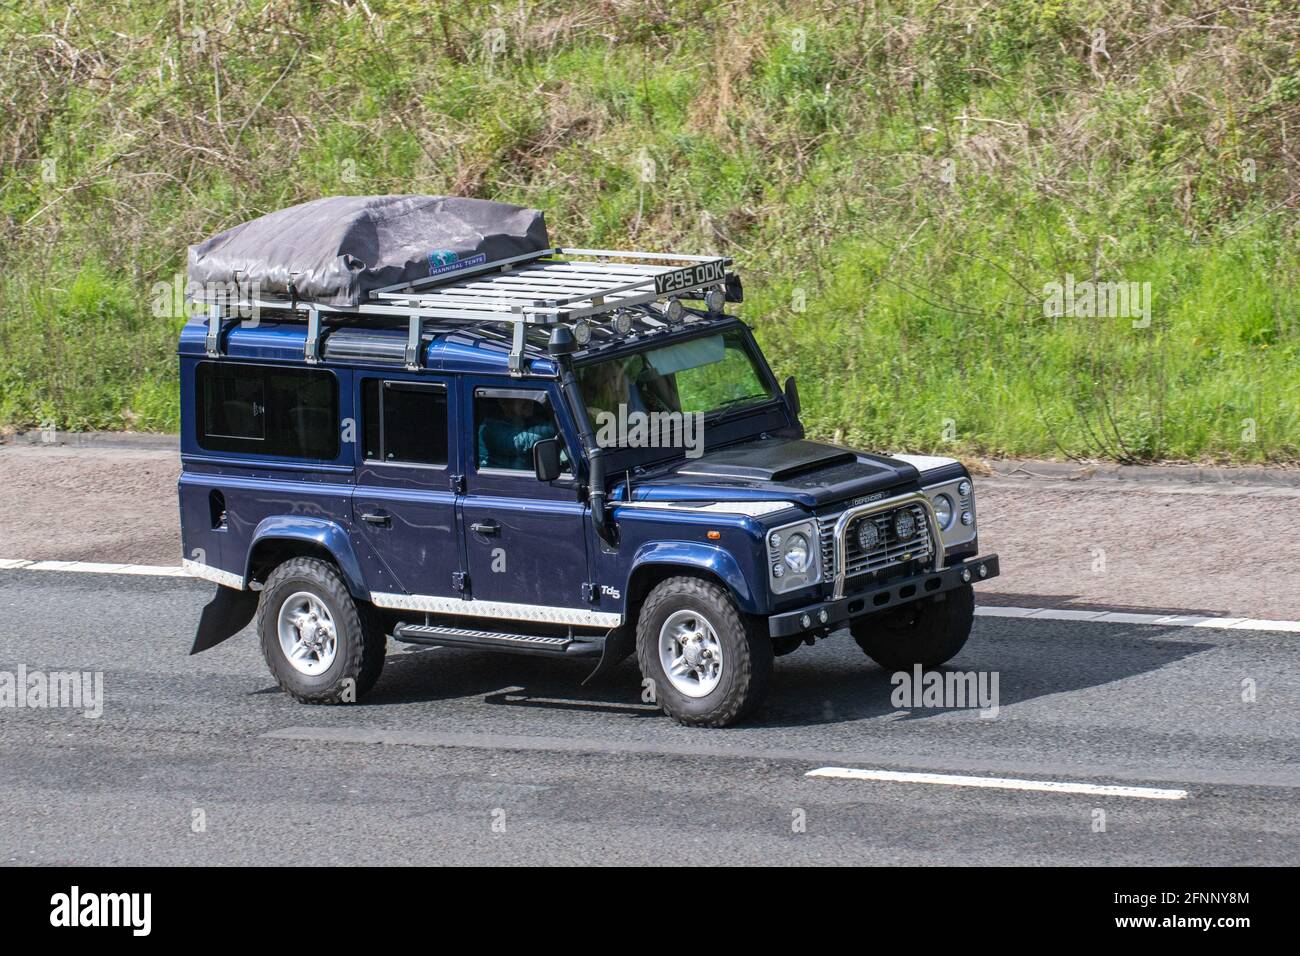 2001 Blue Land Rover Defender County Td5; Vintage  expedition leisure, British off-road 4x4, rugged off-road all-terrain overland rally adventure vehicle, LandRover Discovery Turbo Diesel UK Stock Photo